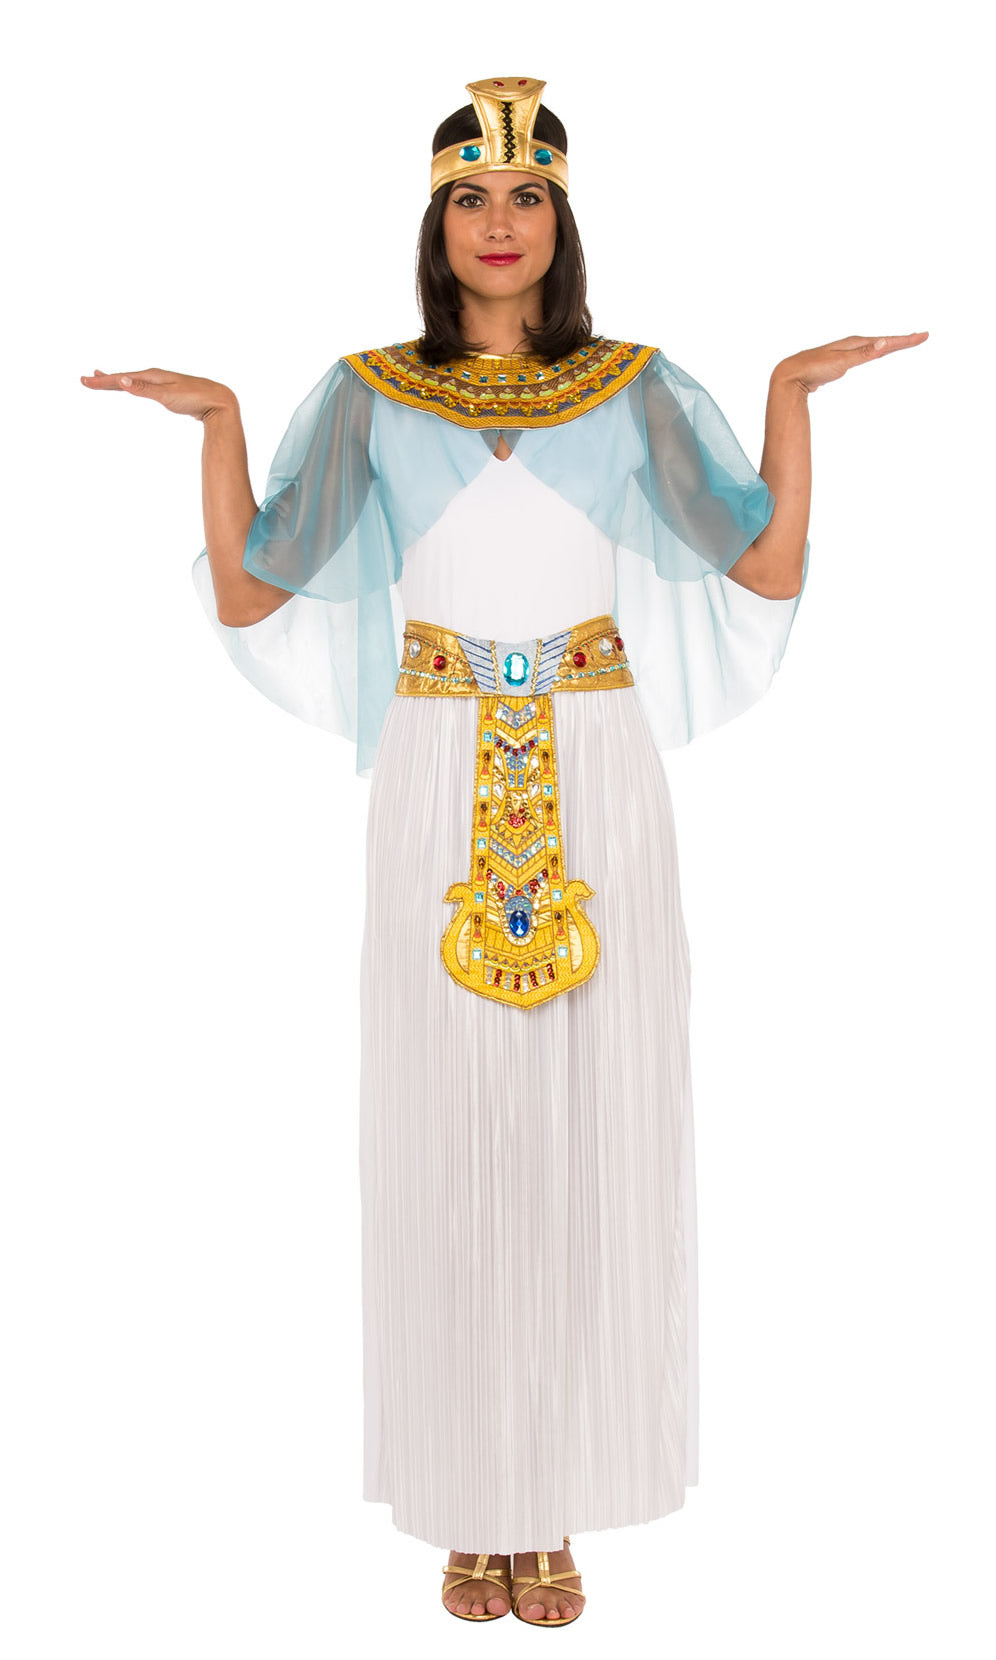 White and gold Cleopatra dress with collar and cape, with headpiece and belt